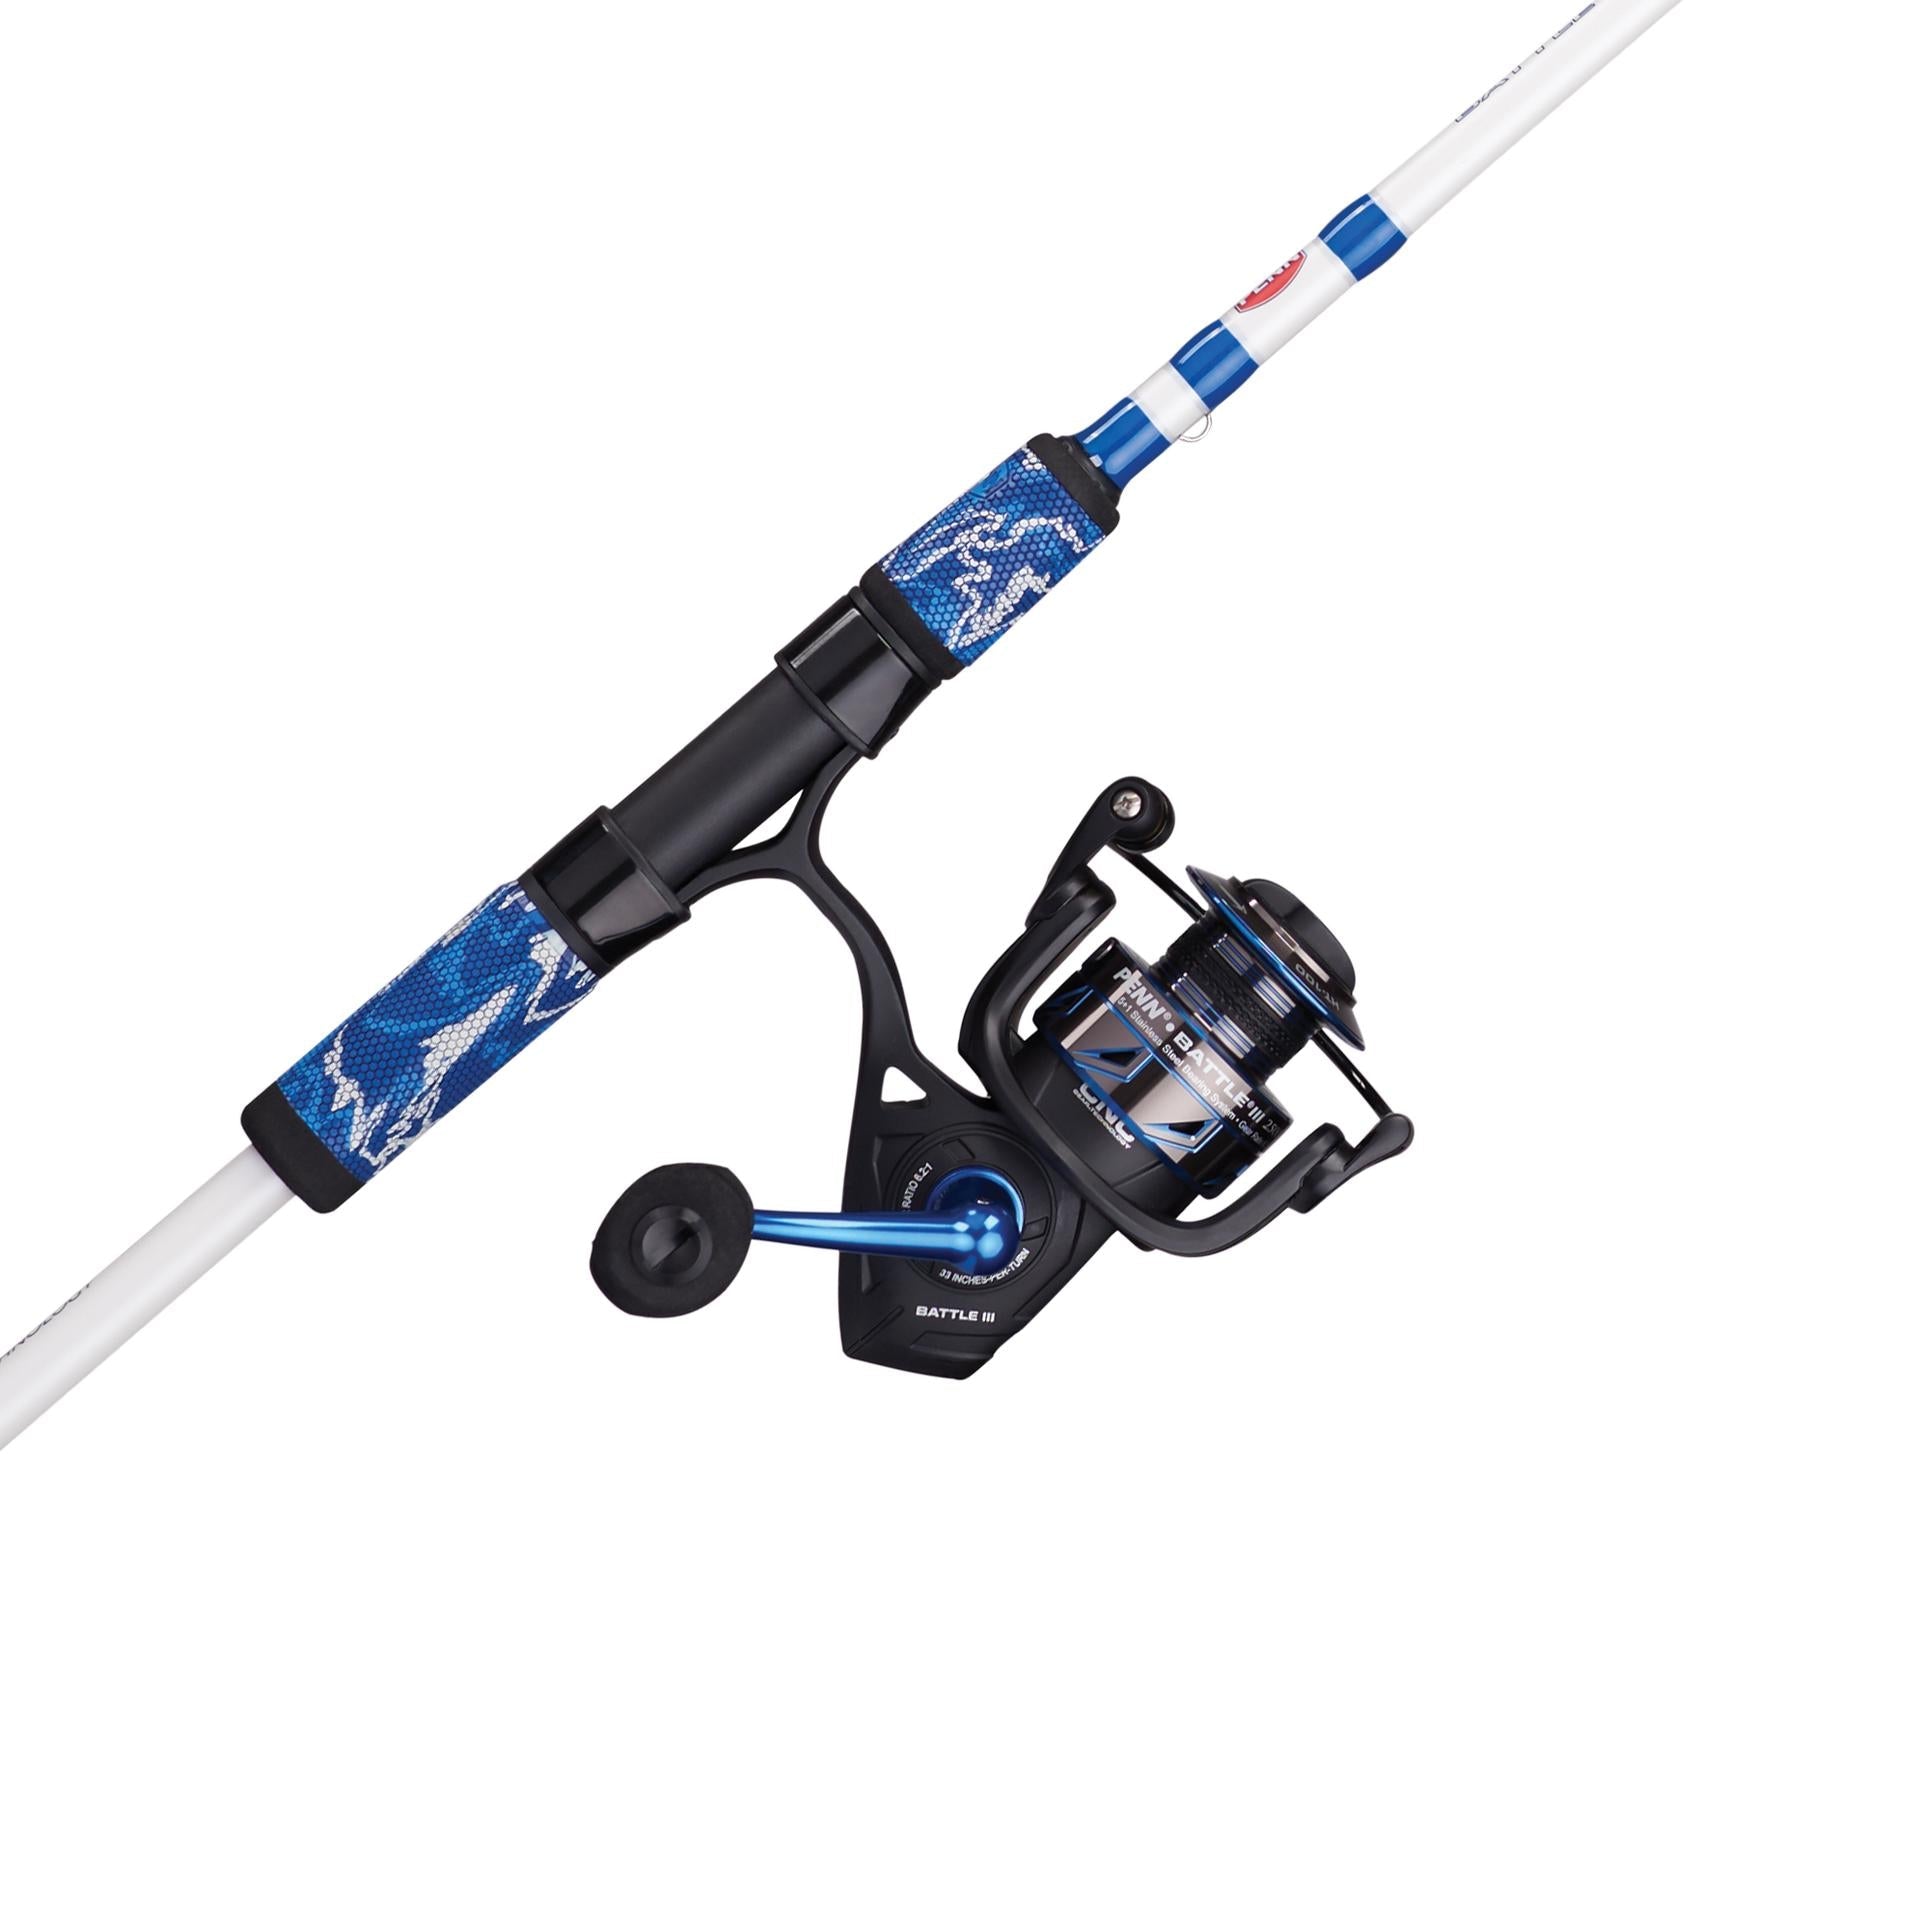 PENN 8' Wrath II Fishing Rod and Spinning Reel Combo, Size 5000, Medium  Heavy Power, Moderate Fast Action, Corrosion-Resistant Graphite  Construction, Lightweight and Durable: Buy Online at Best Price in UAE 